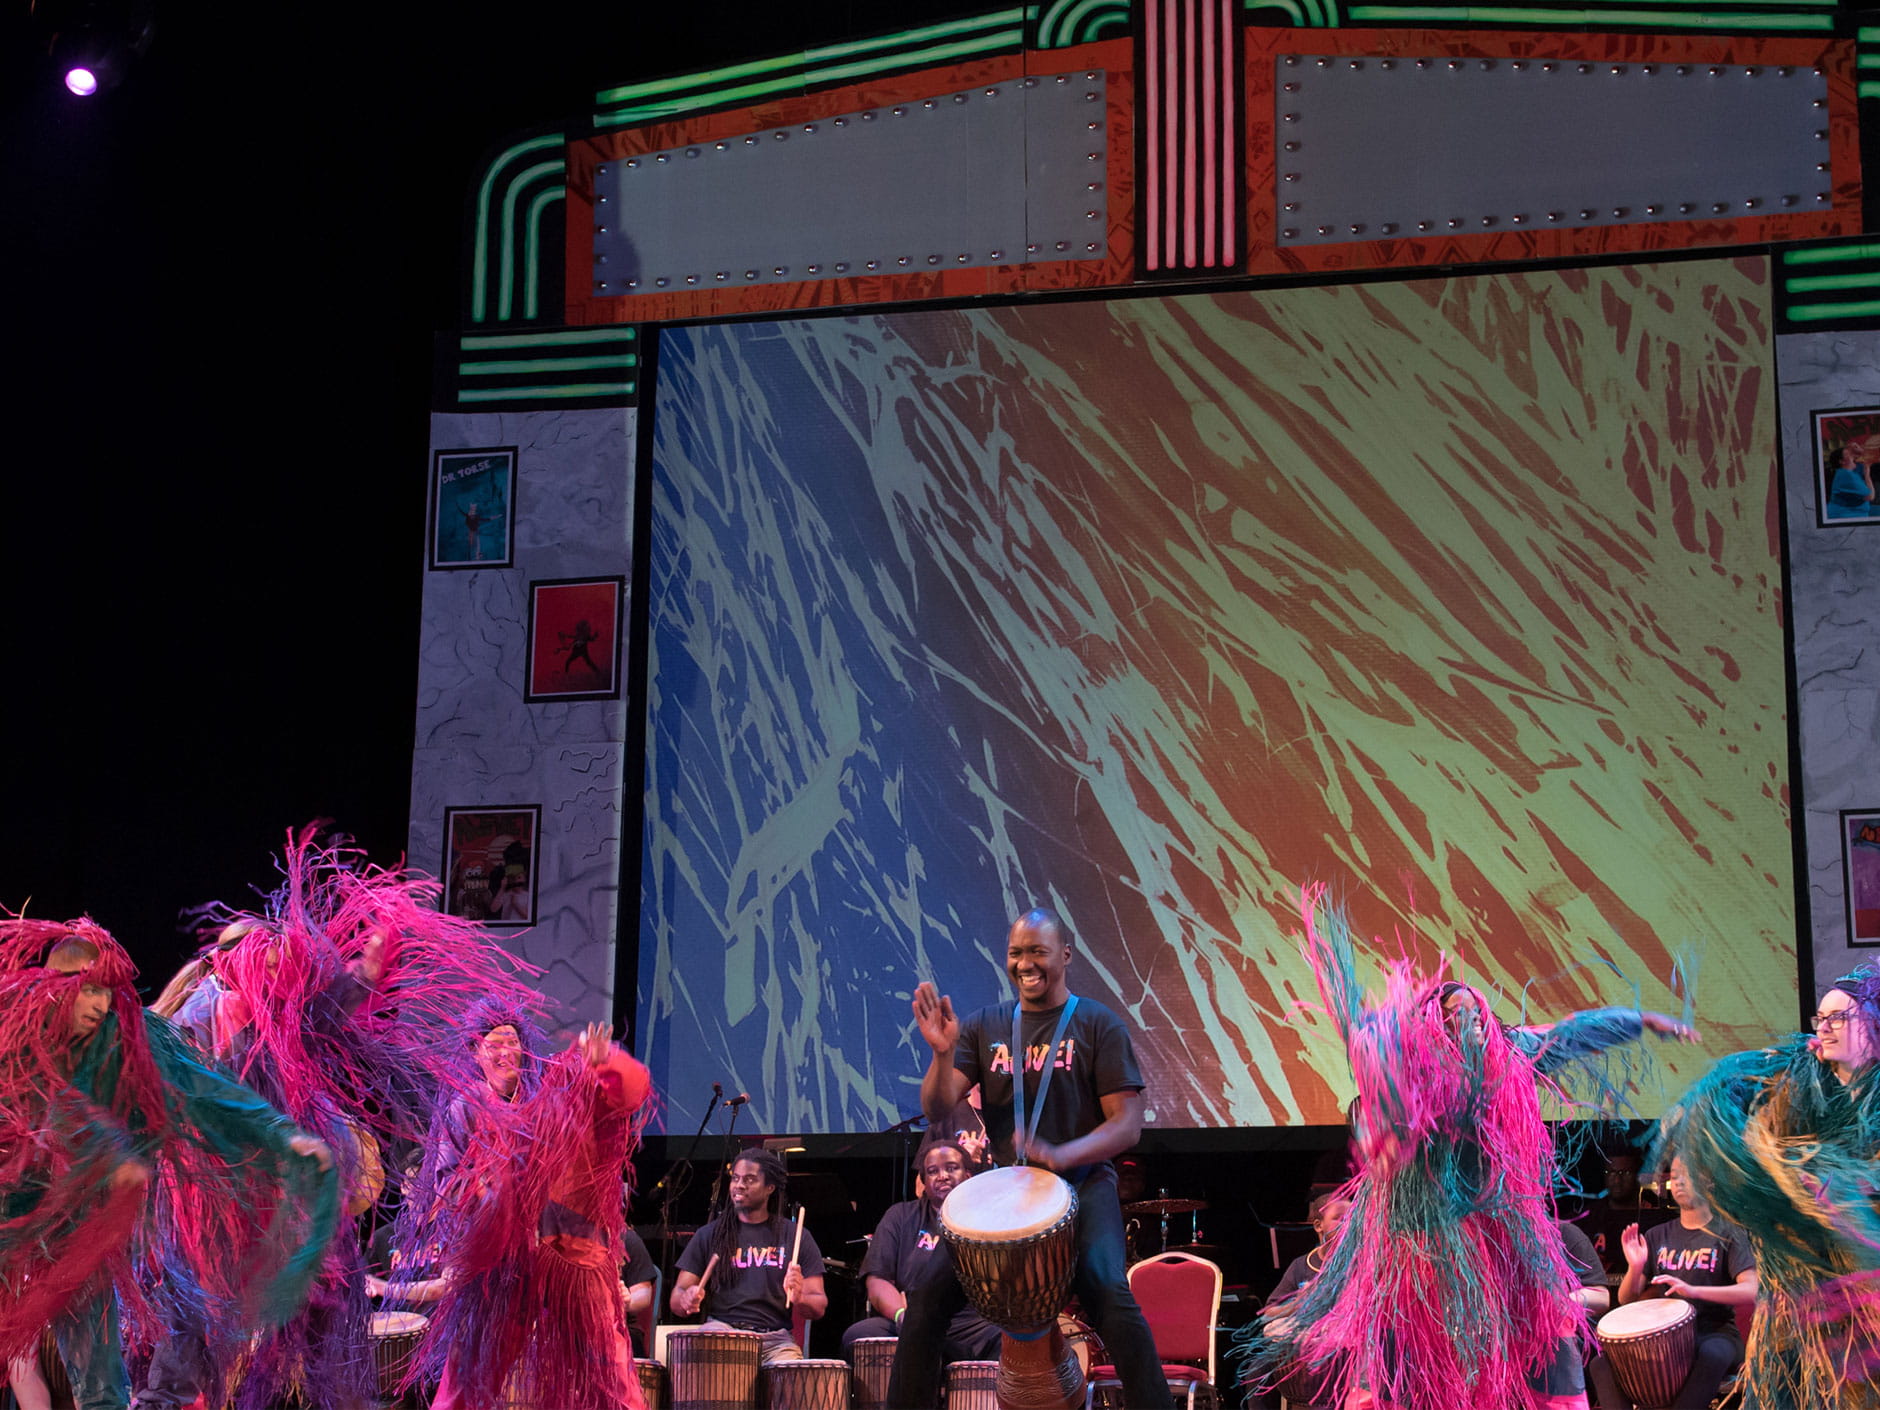 Express Yourself dancers in colorful costumes join musicians on a decorated stage